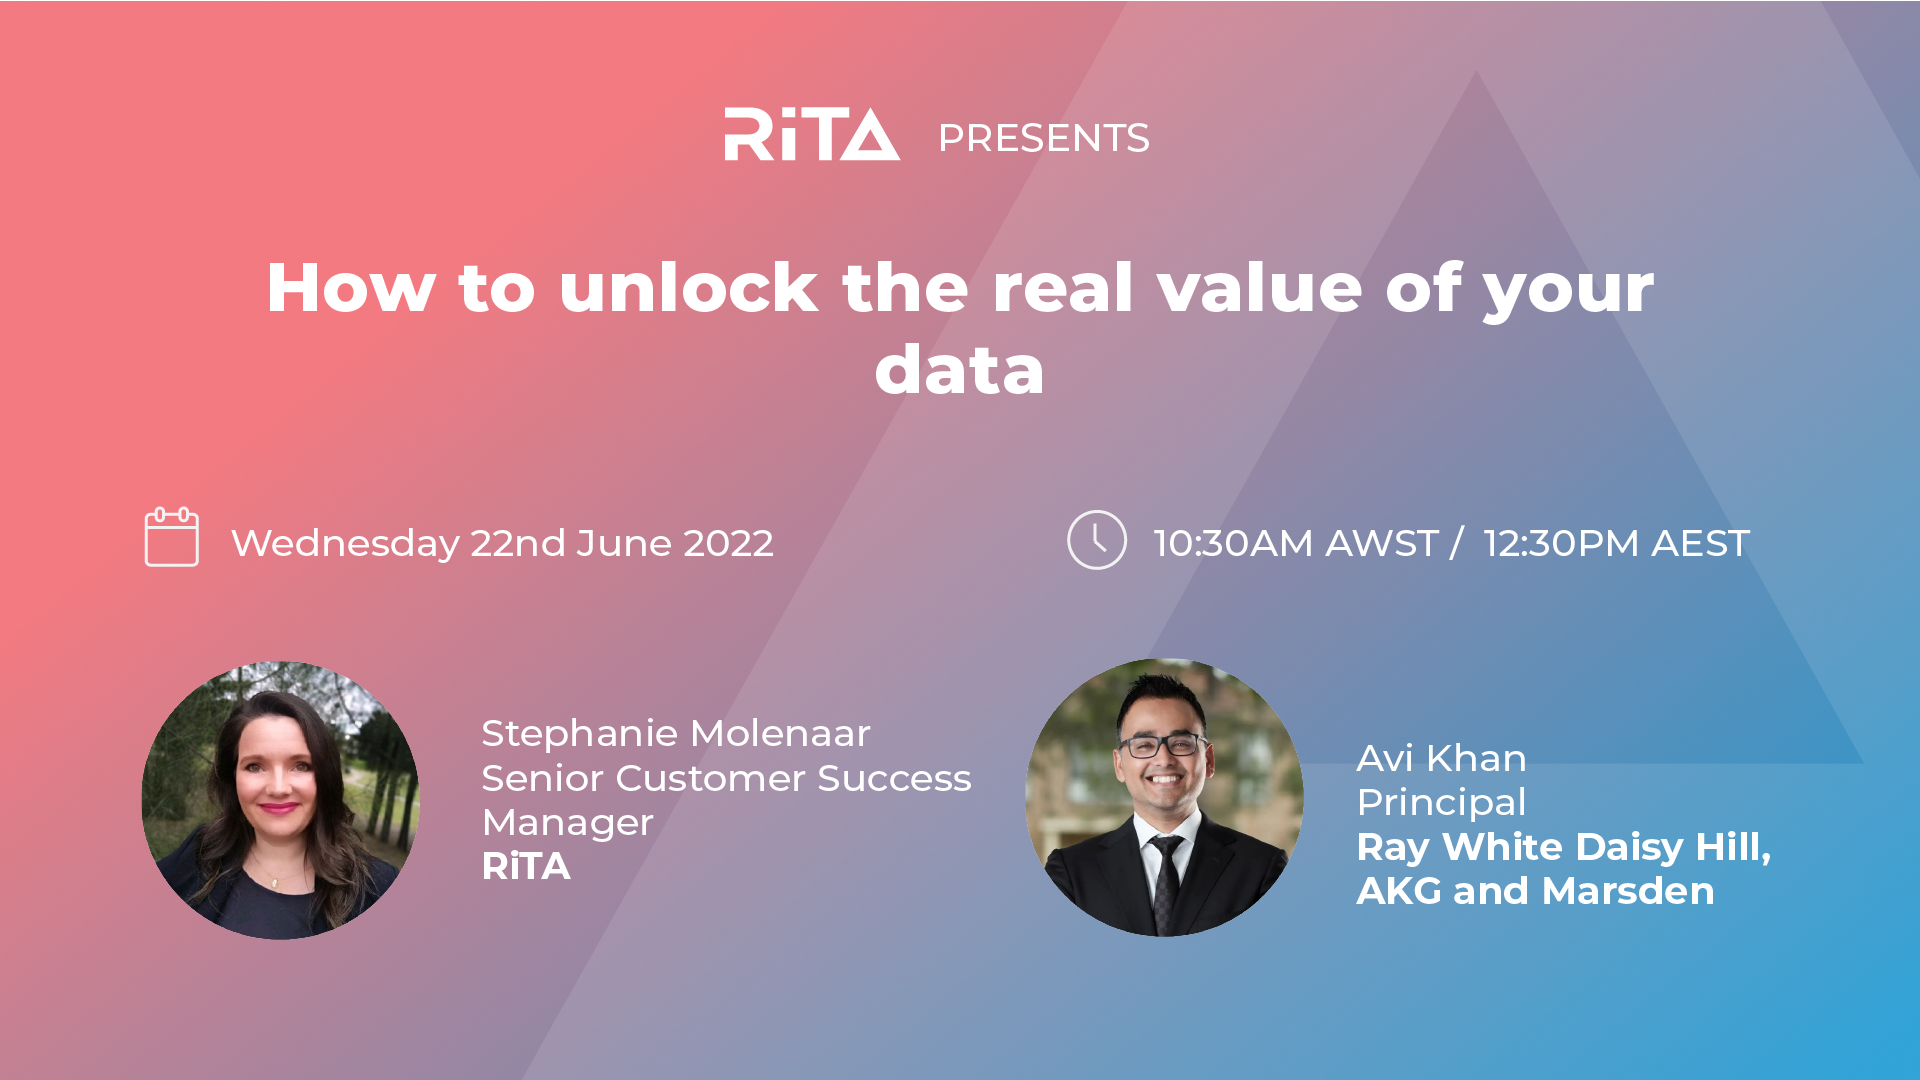 [WEBINAR] HOW TO UNLOCK THE REAL VALUE OF YOUR DATA